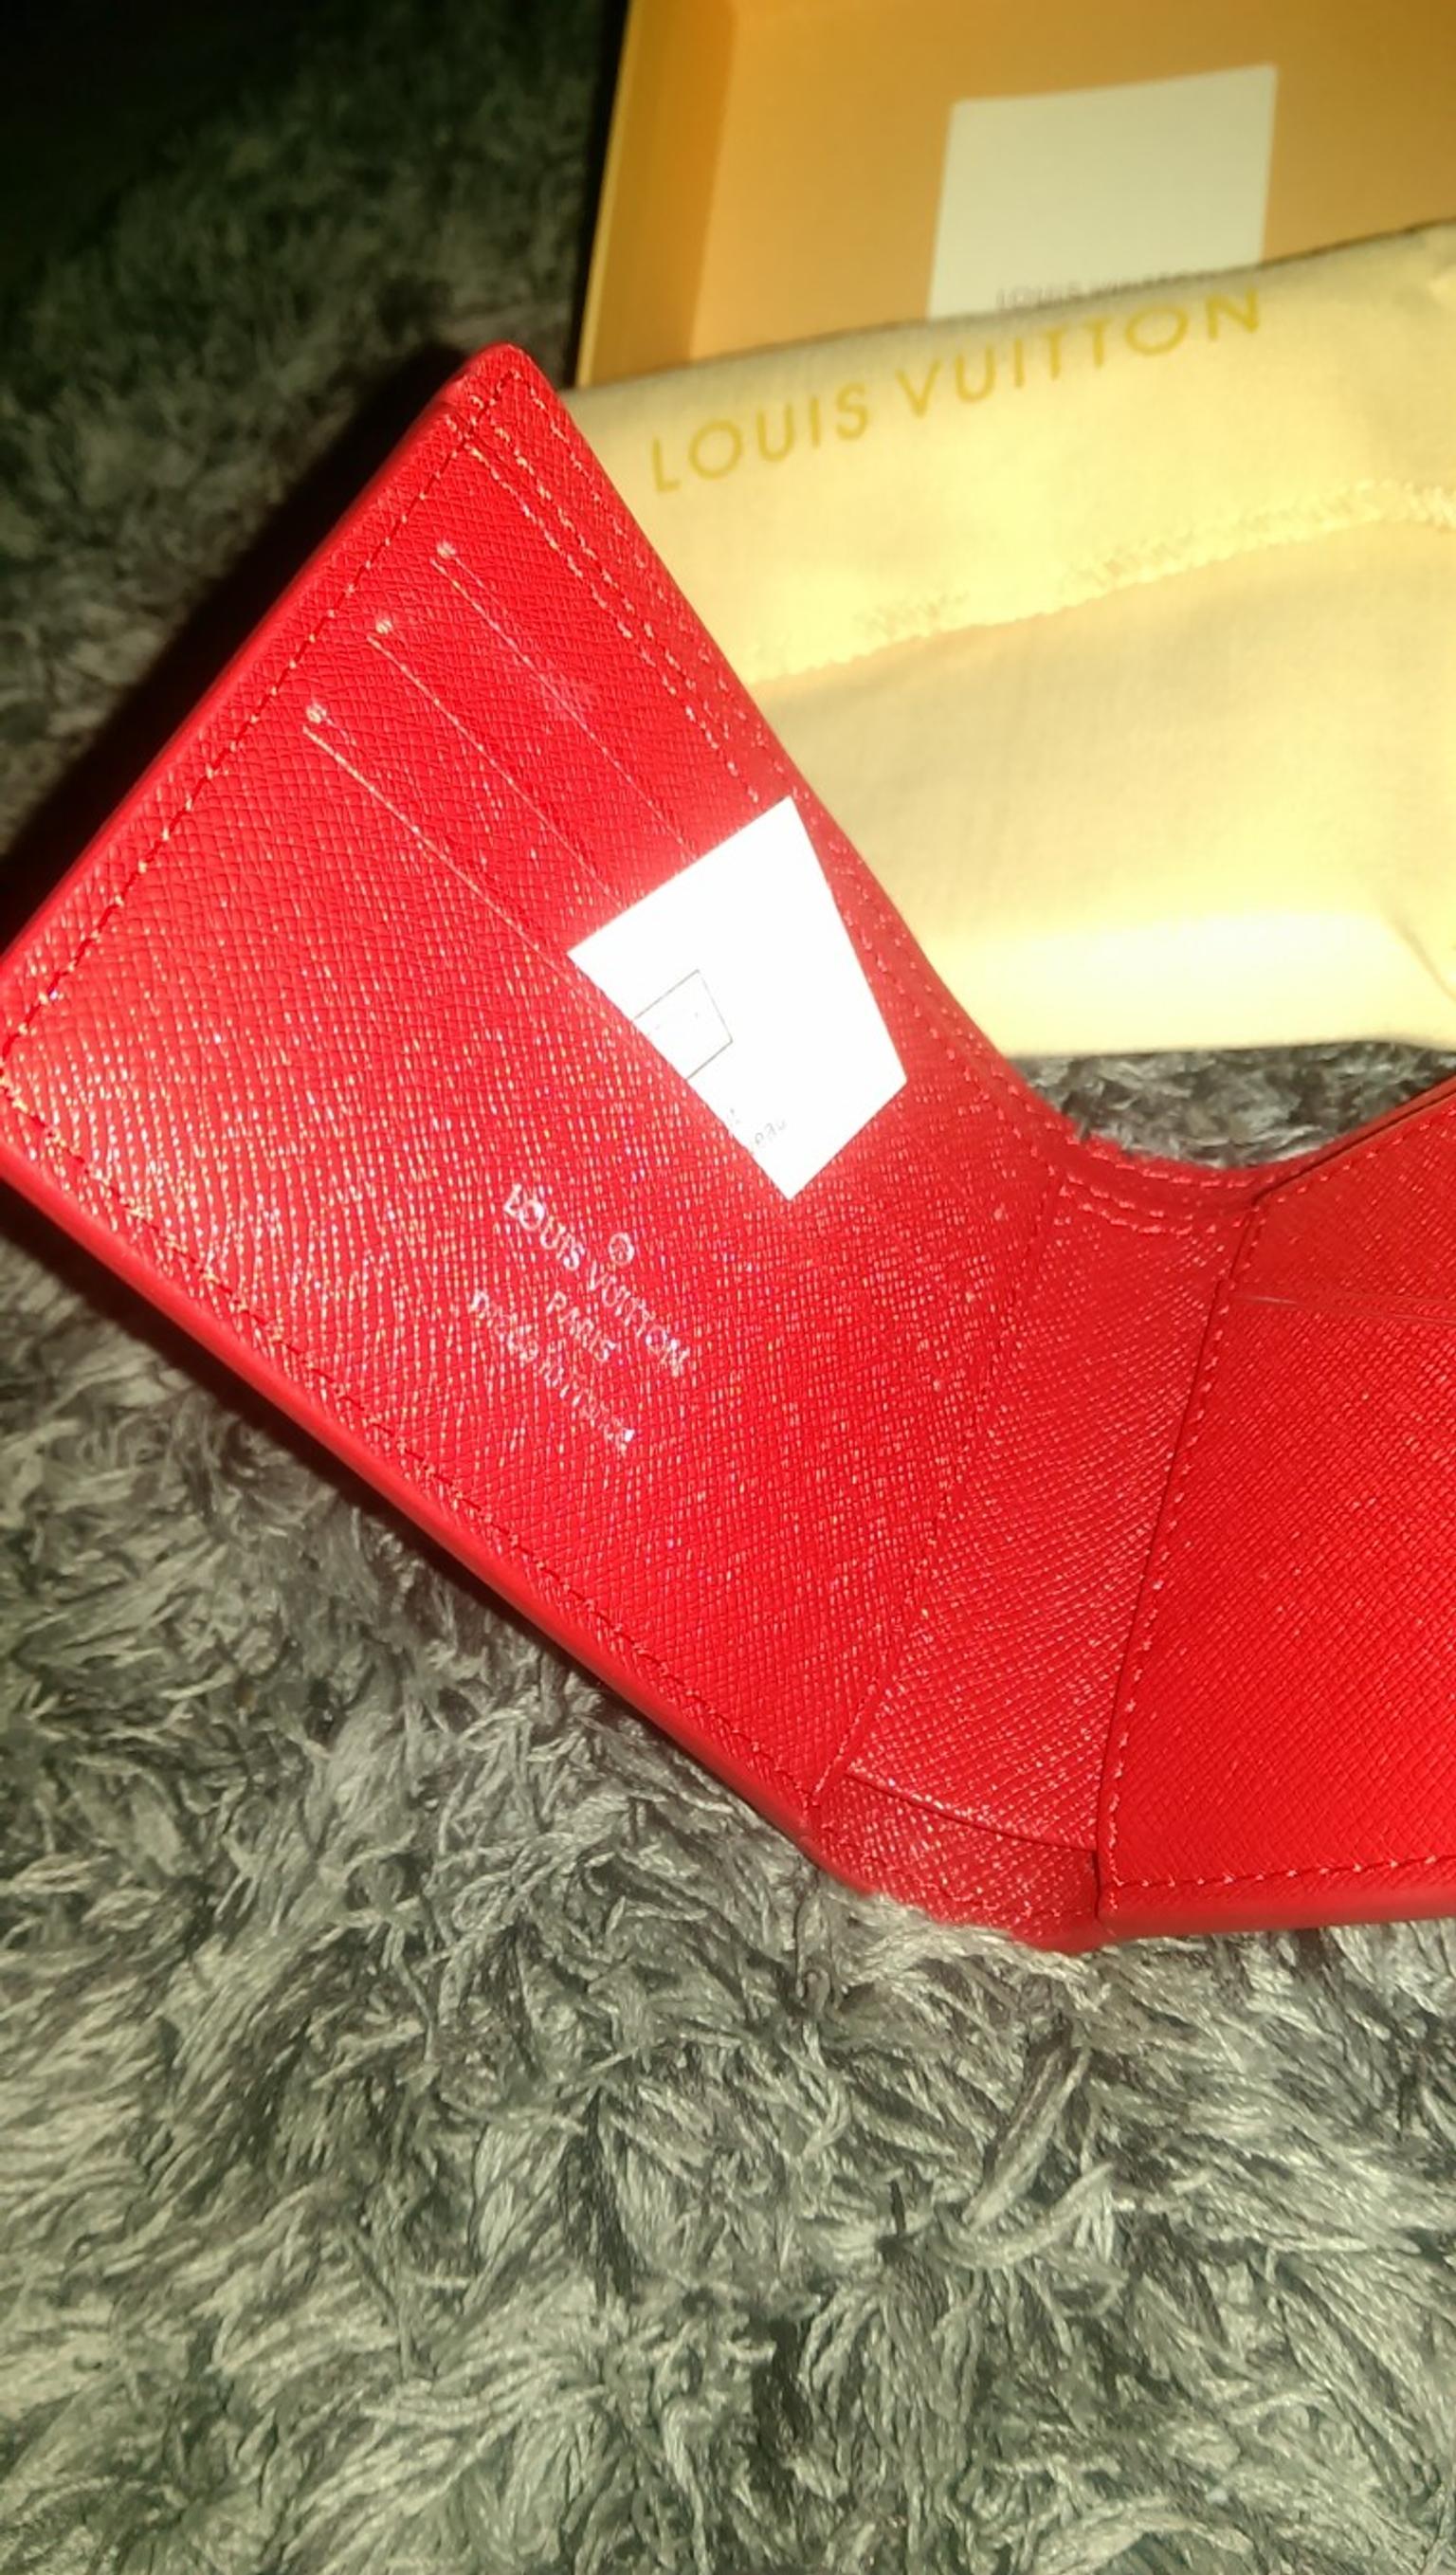 Supreme X Louis Vuitton Slender Wallet Red in N4 London for £200.00 for sale | Shpock